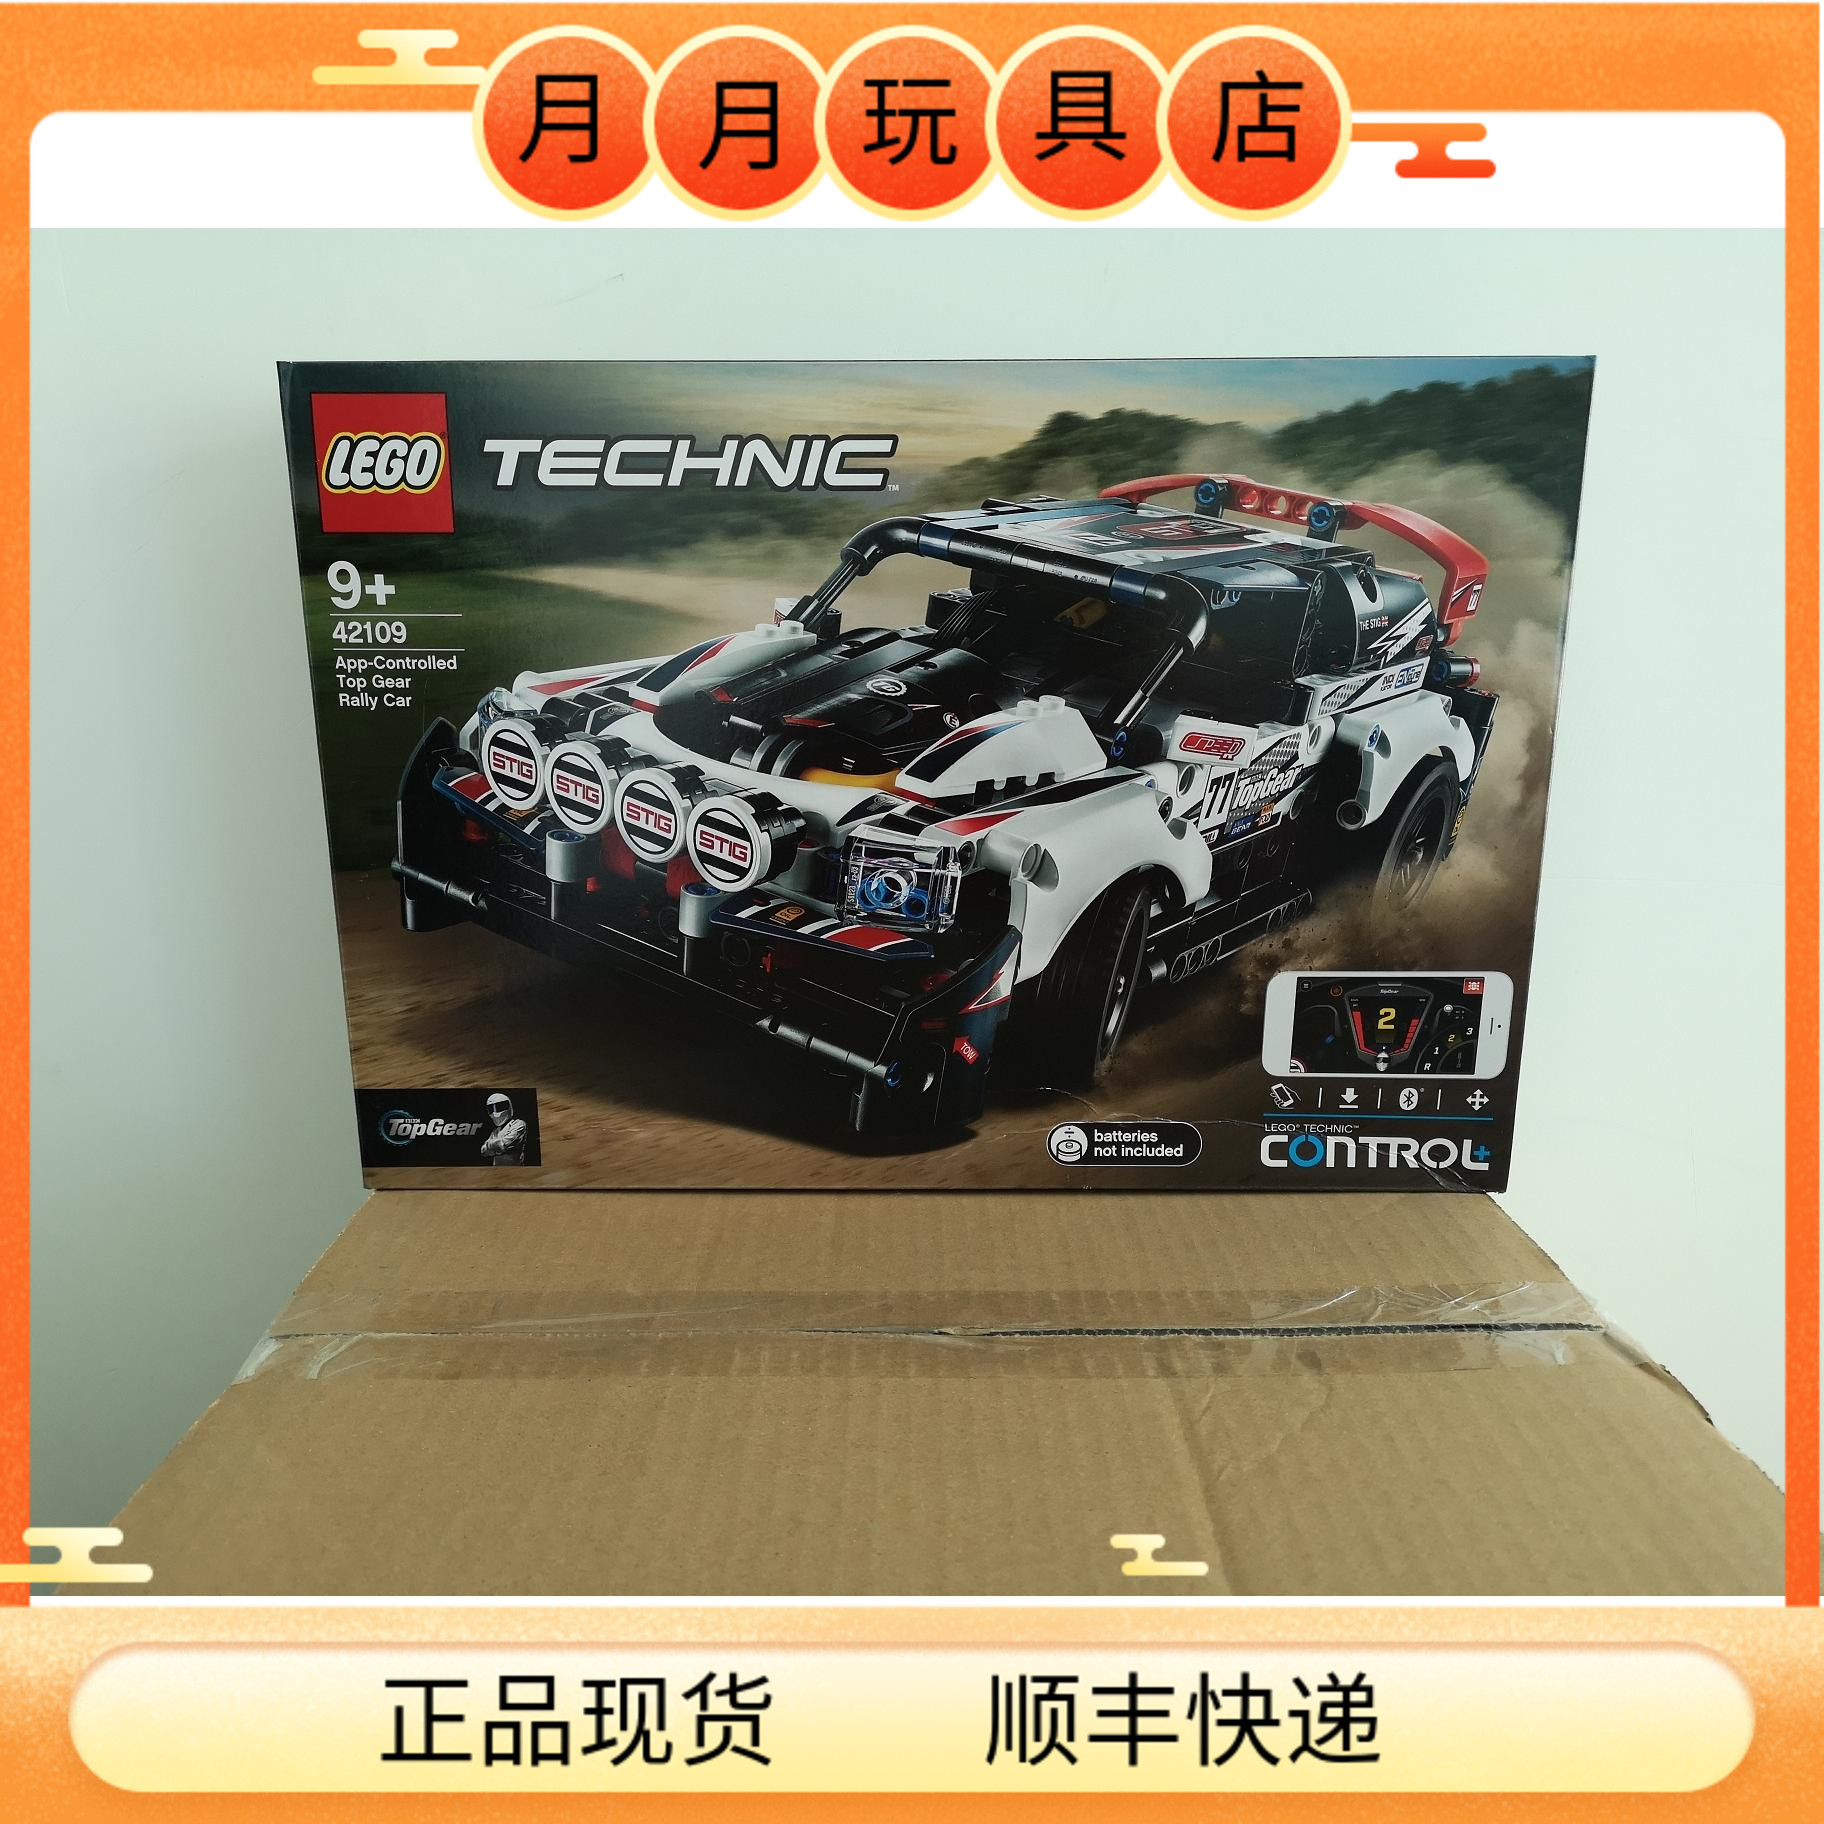 LEGO Lego building block technology series 42109 remote control rally car display box shipped from Beijing